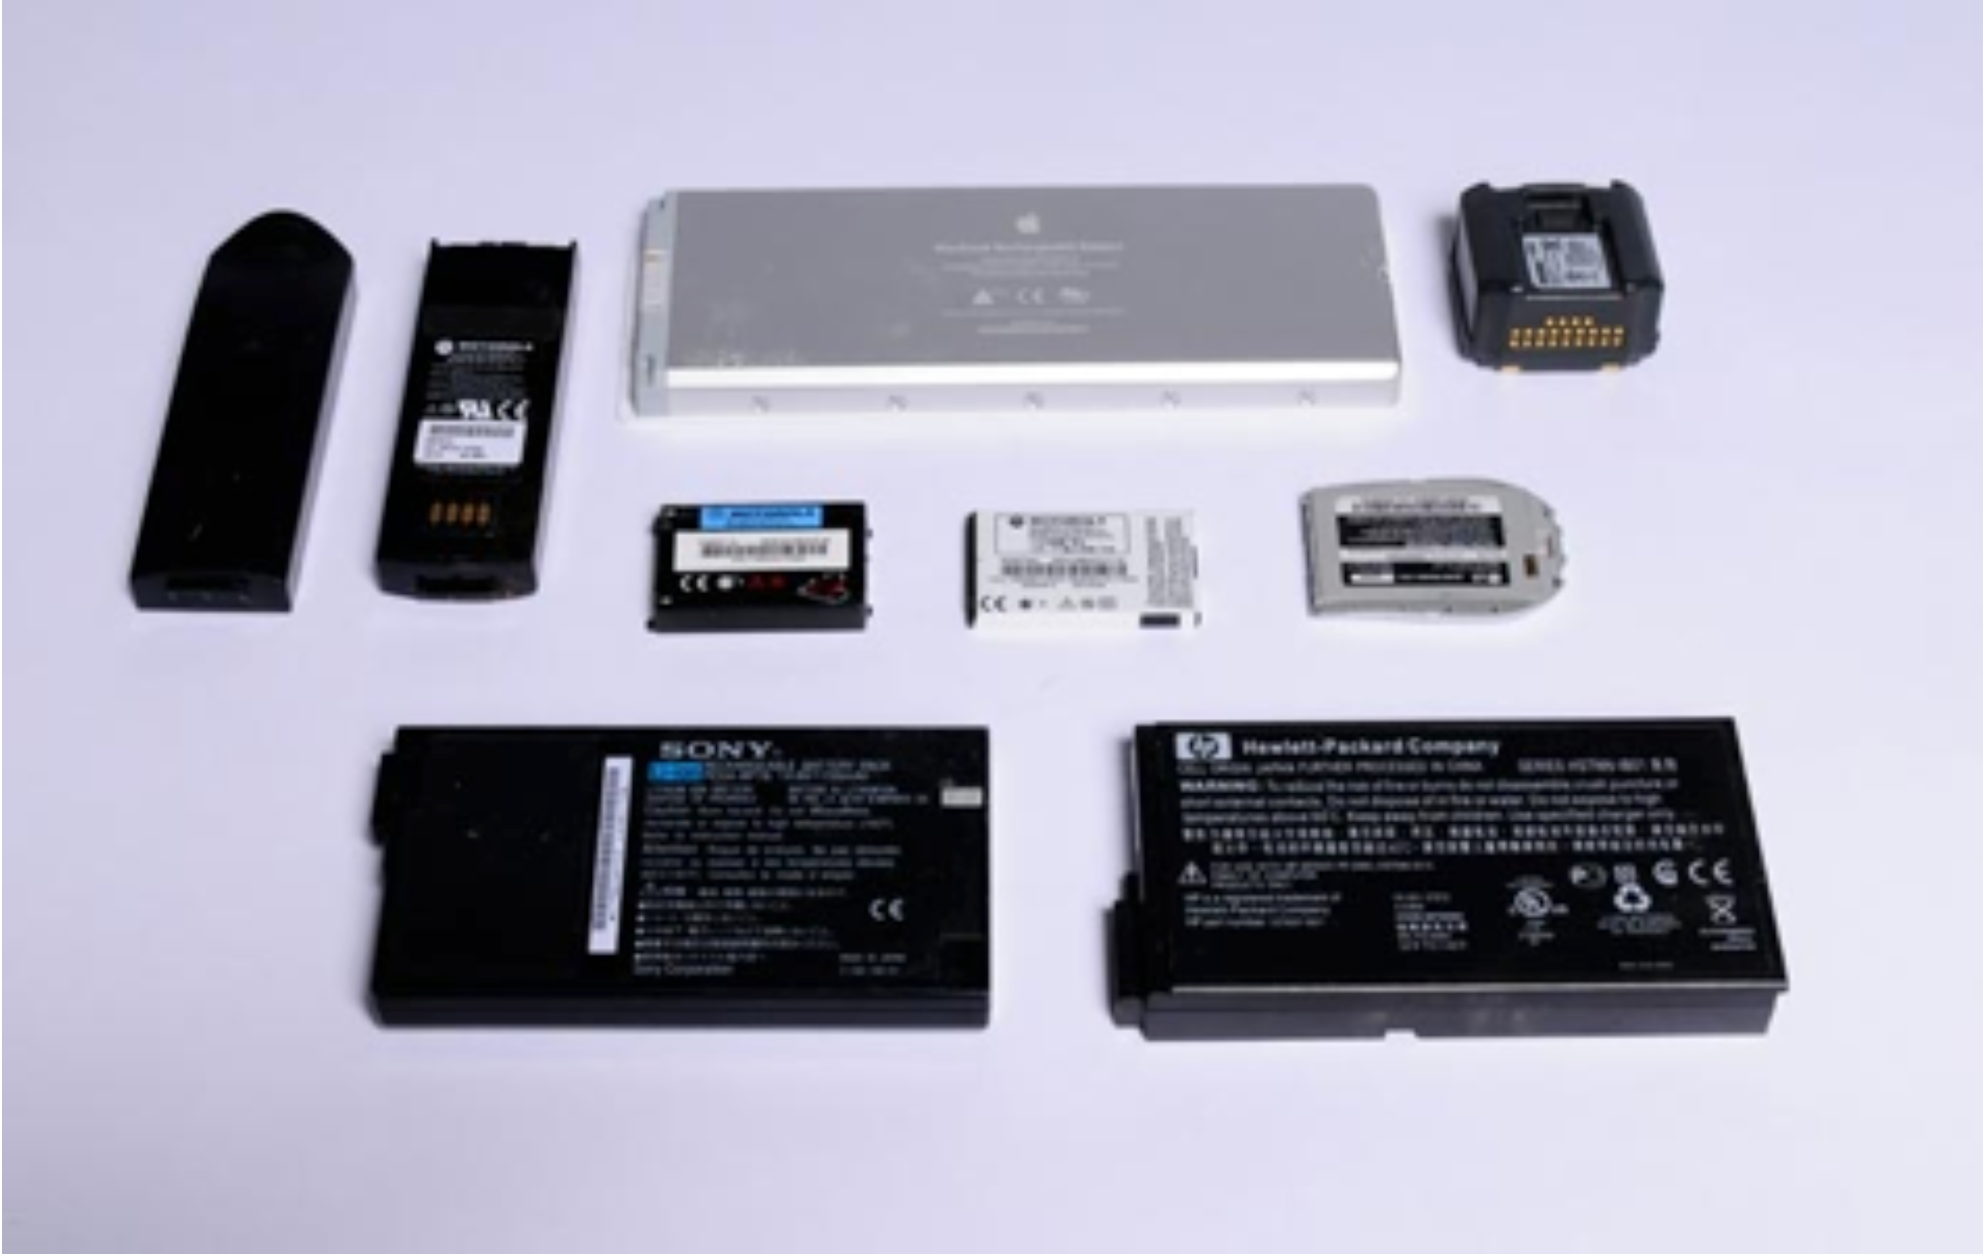 Dry Cell Battery Recycling Program